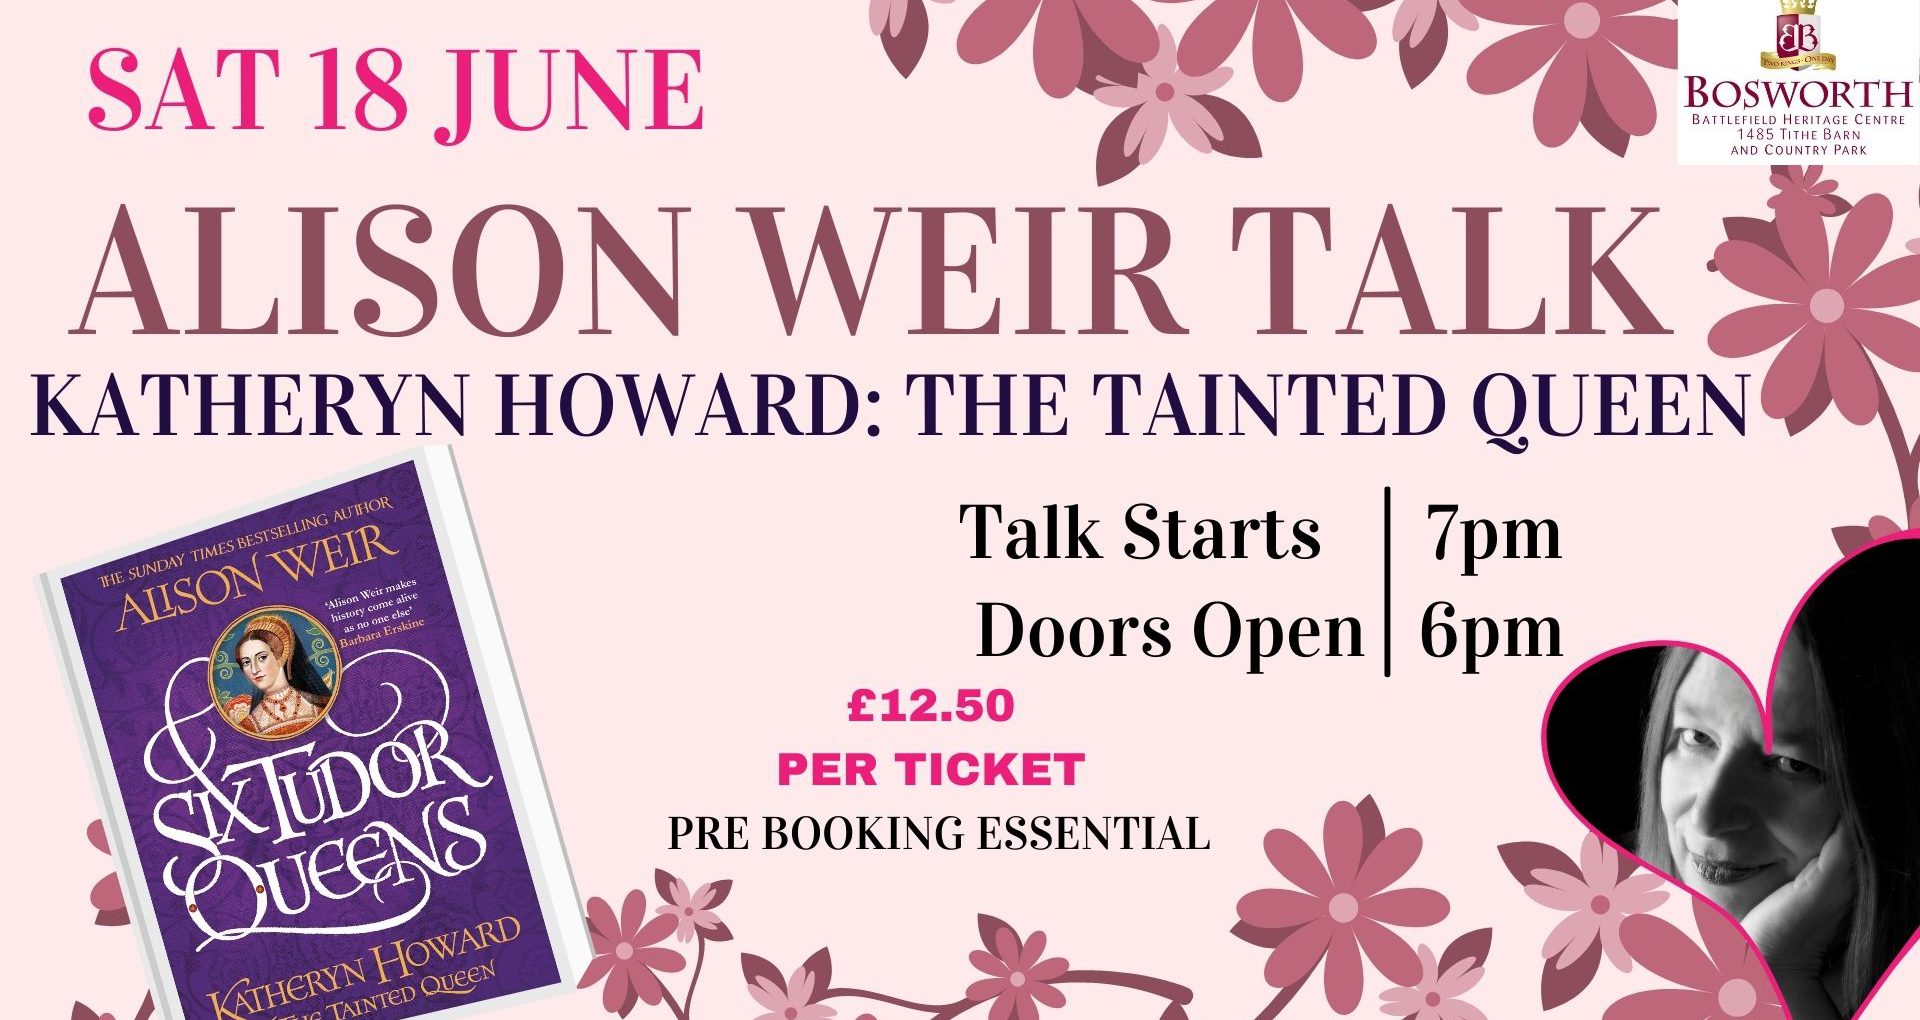 Alison Weir Talk: Katheryn Howard - The Tainted Queen